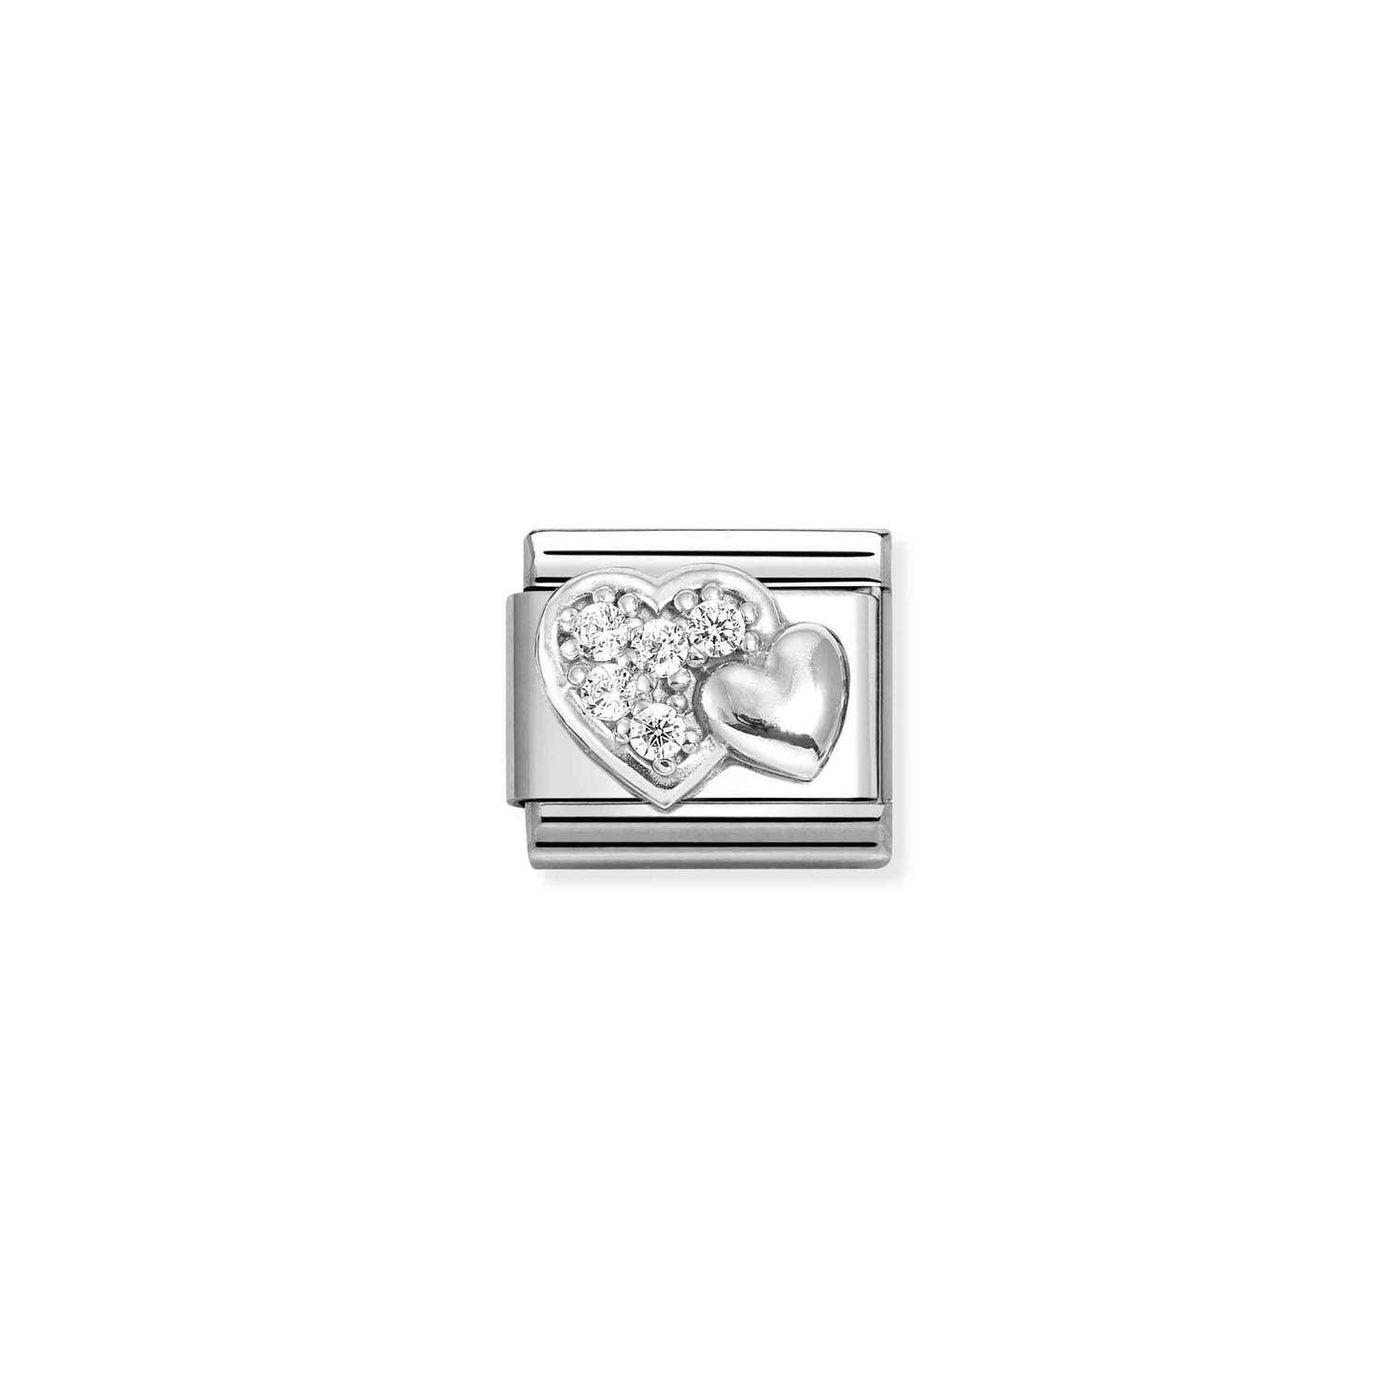 Nomination Classic Silver Cubic Zirconia Raised Hearts Charm